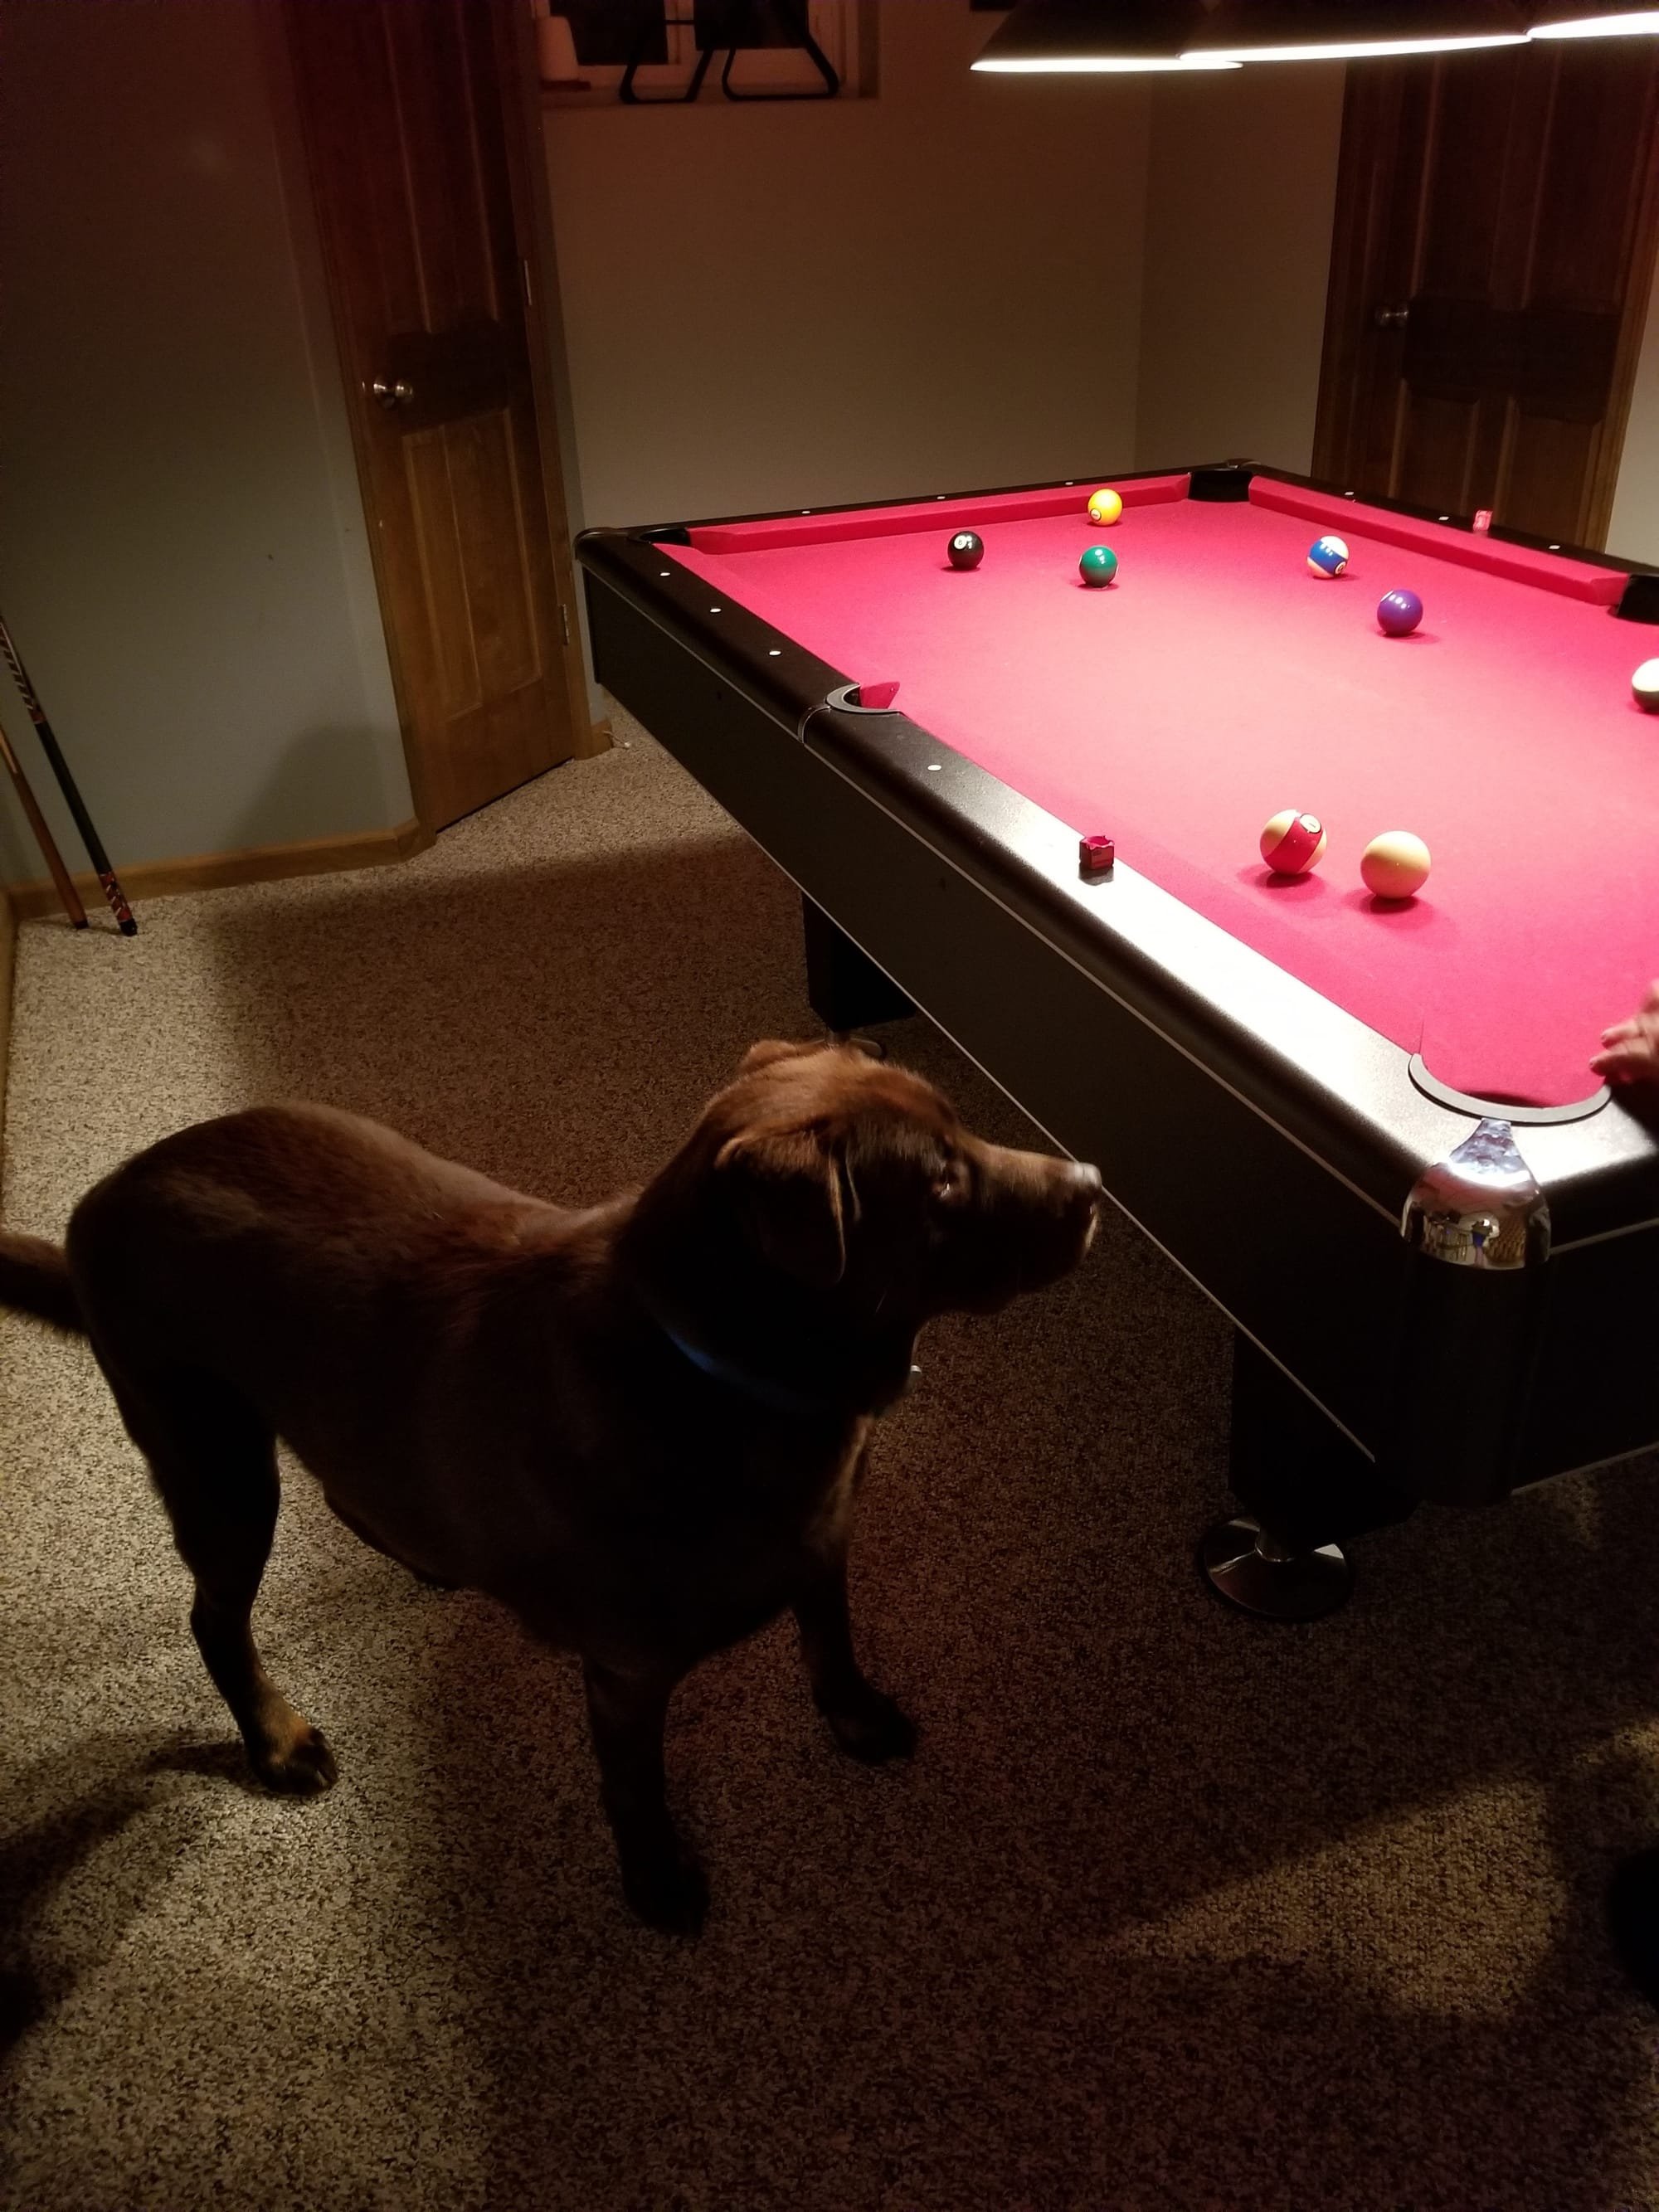 At my cousin's house, he wondered where the ball went (1st time he ever saw a pool table) 2018.